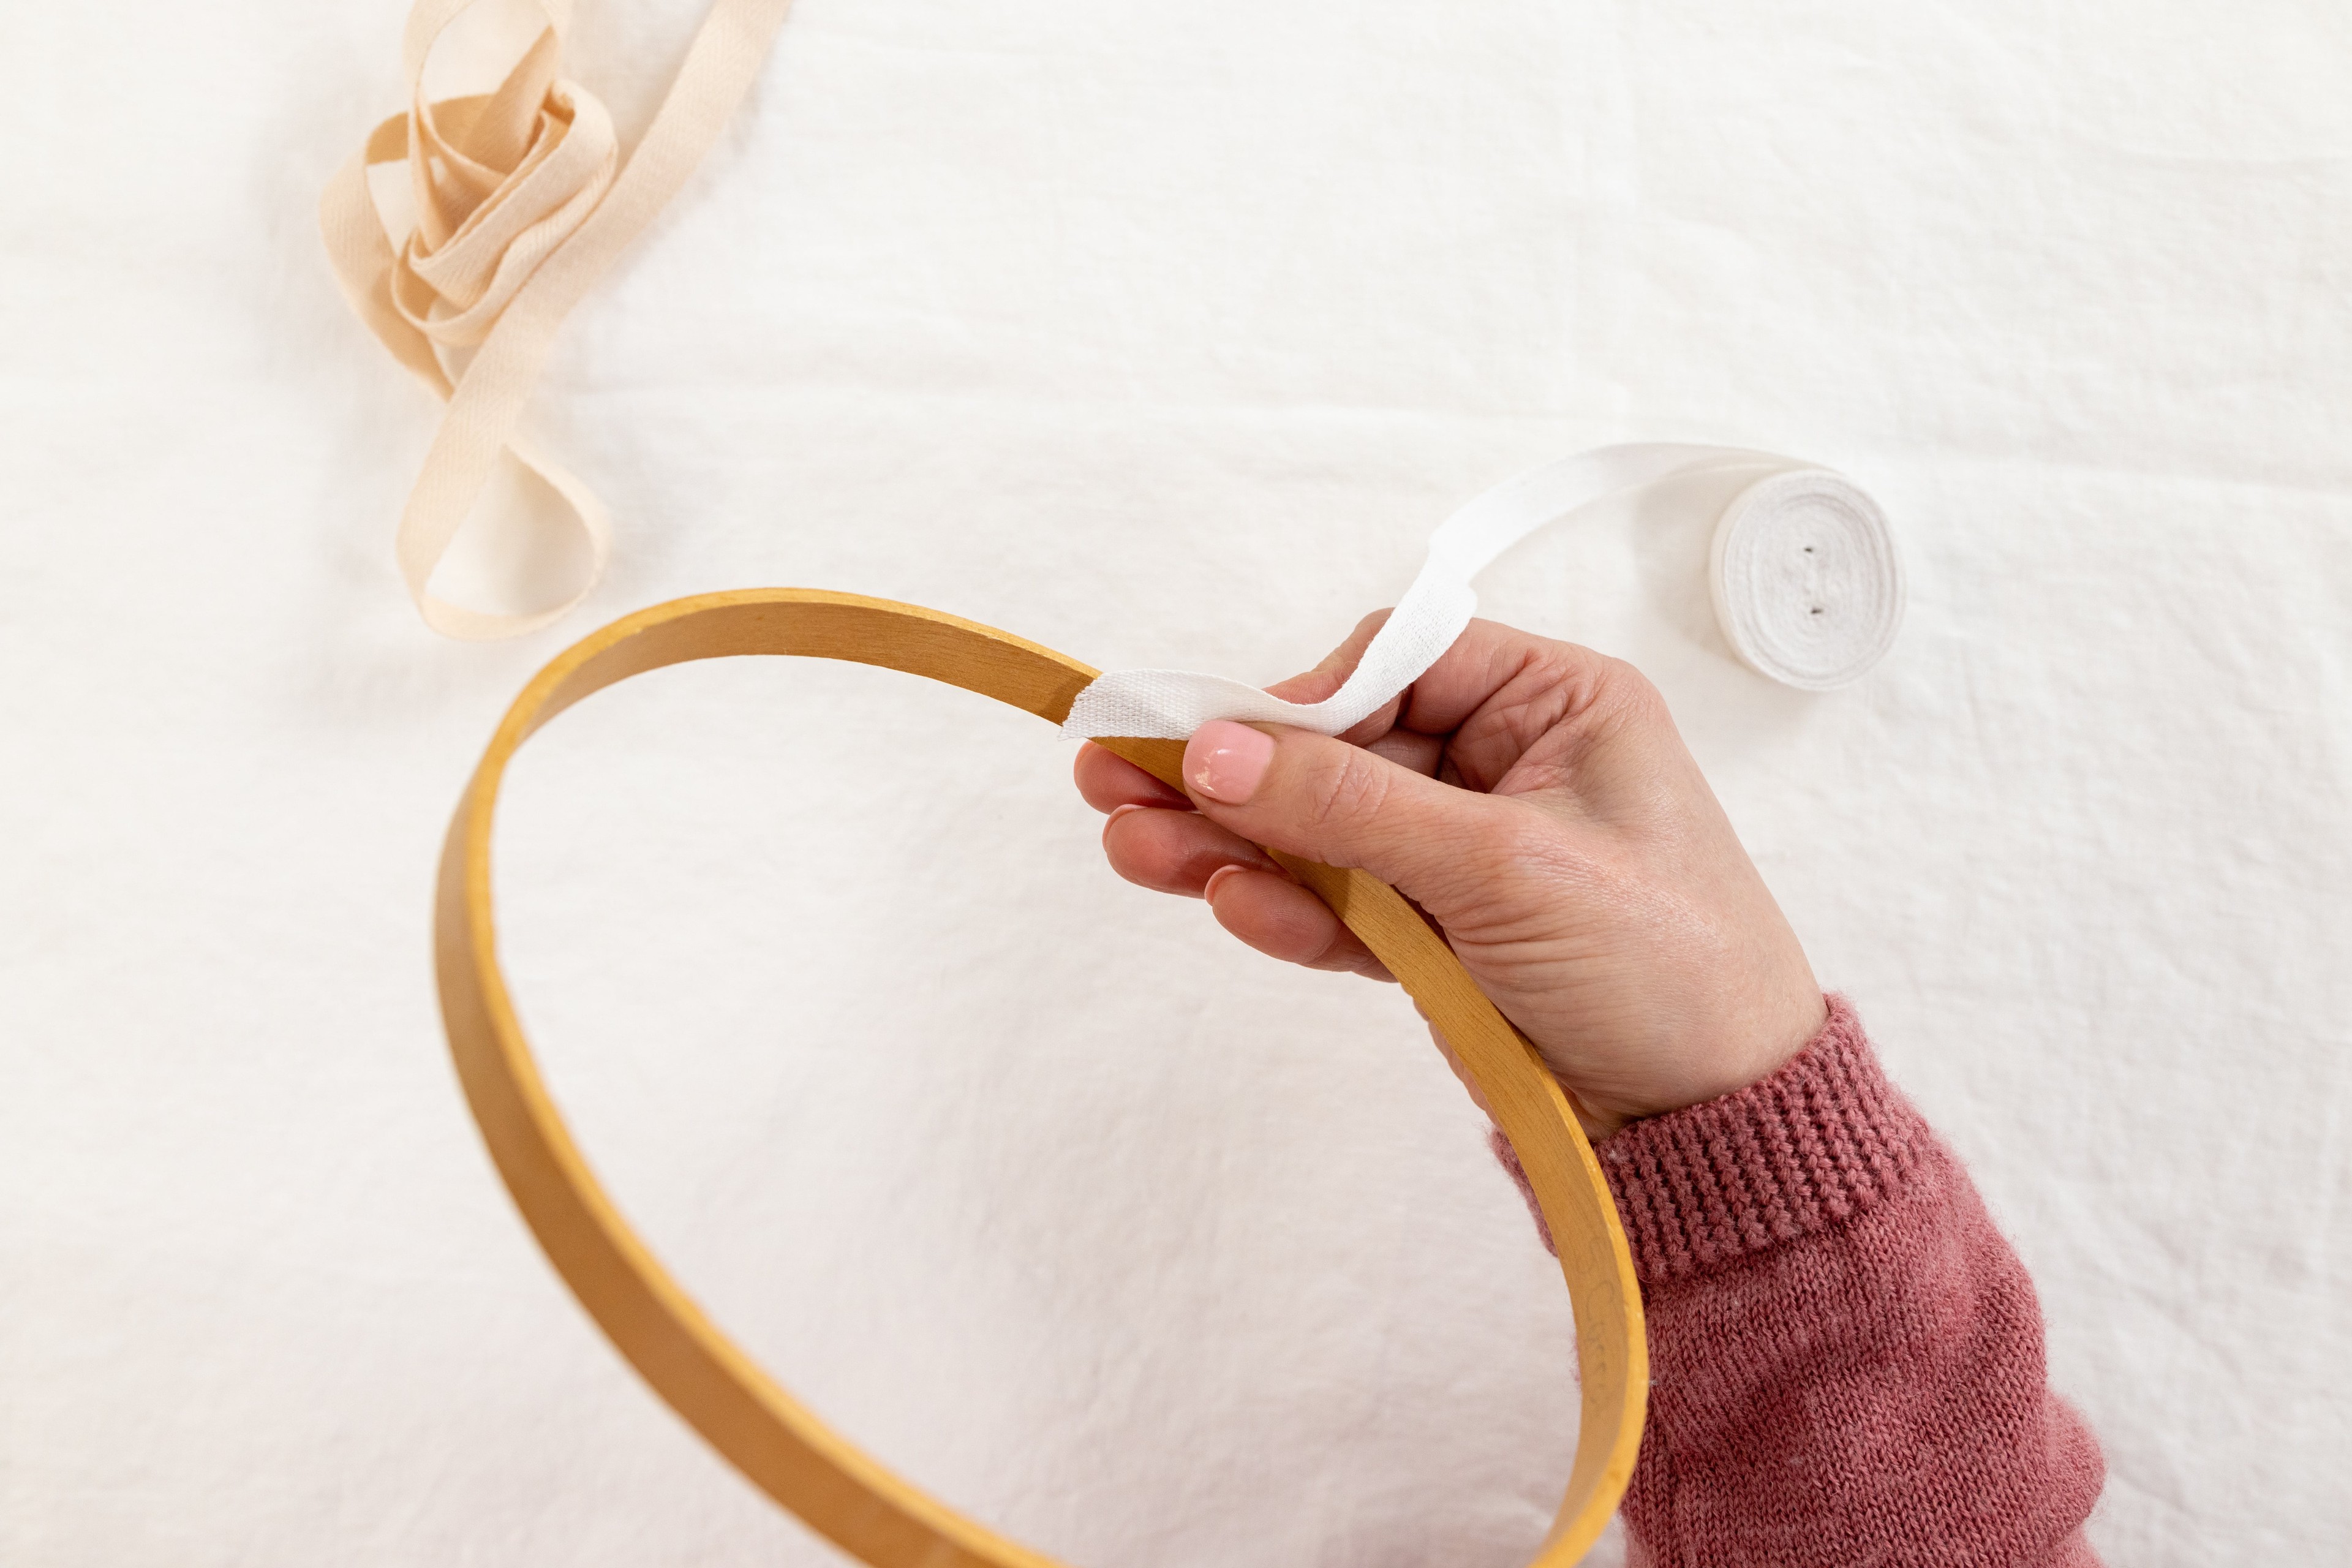 A hand holds tape on a hoop.